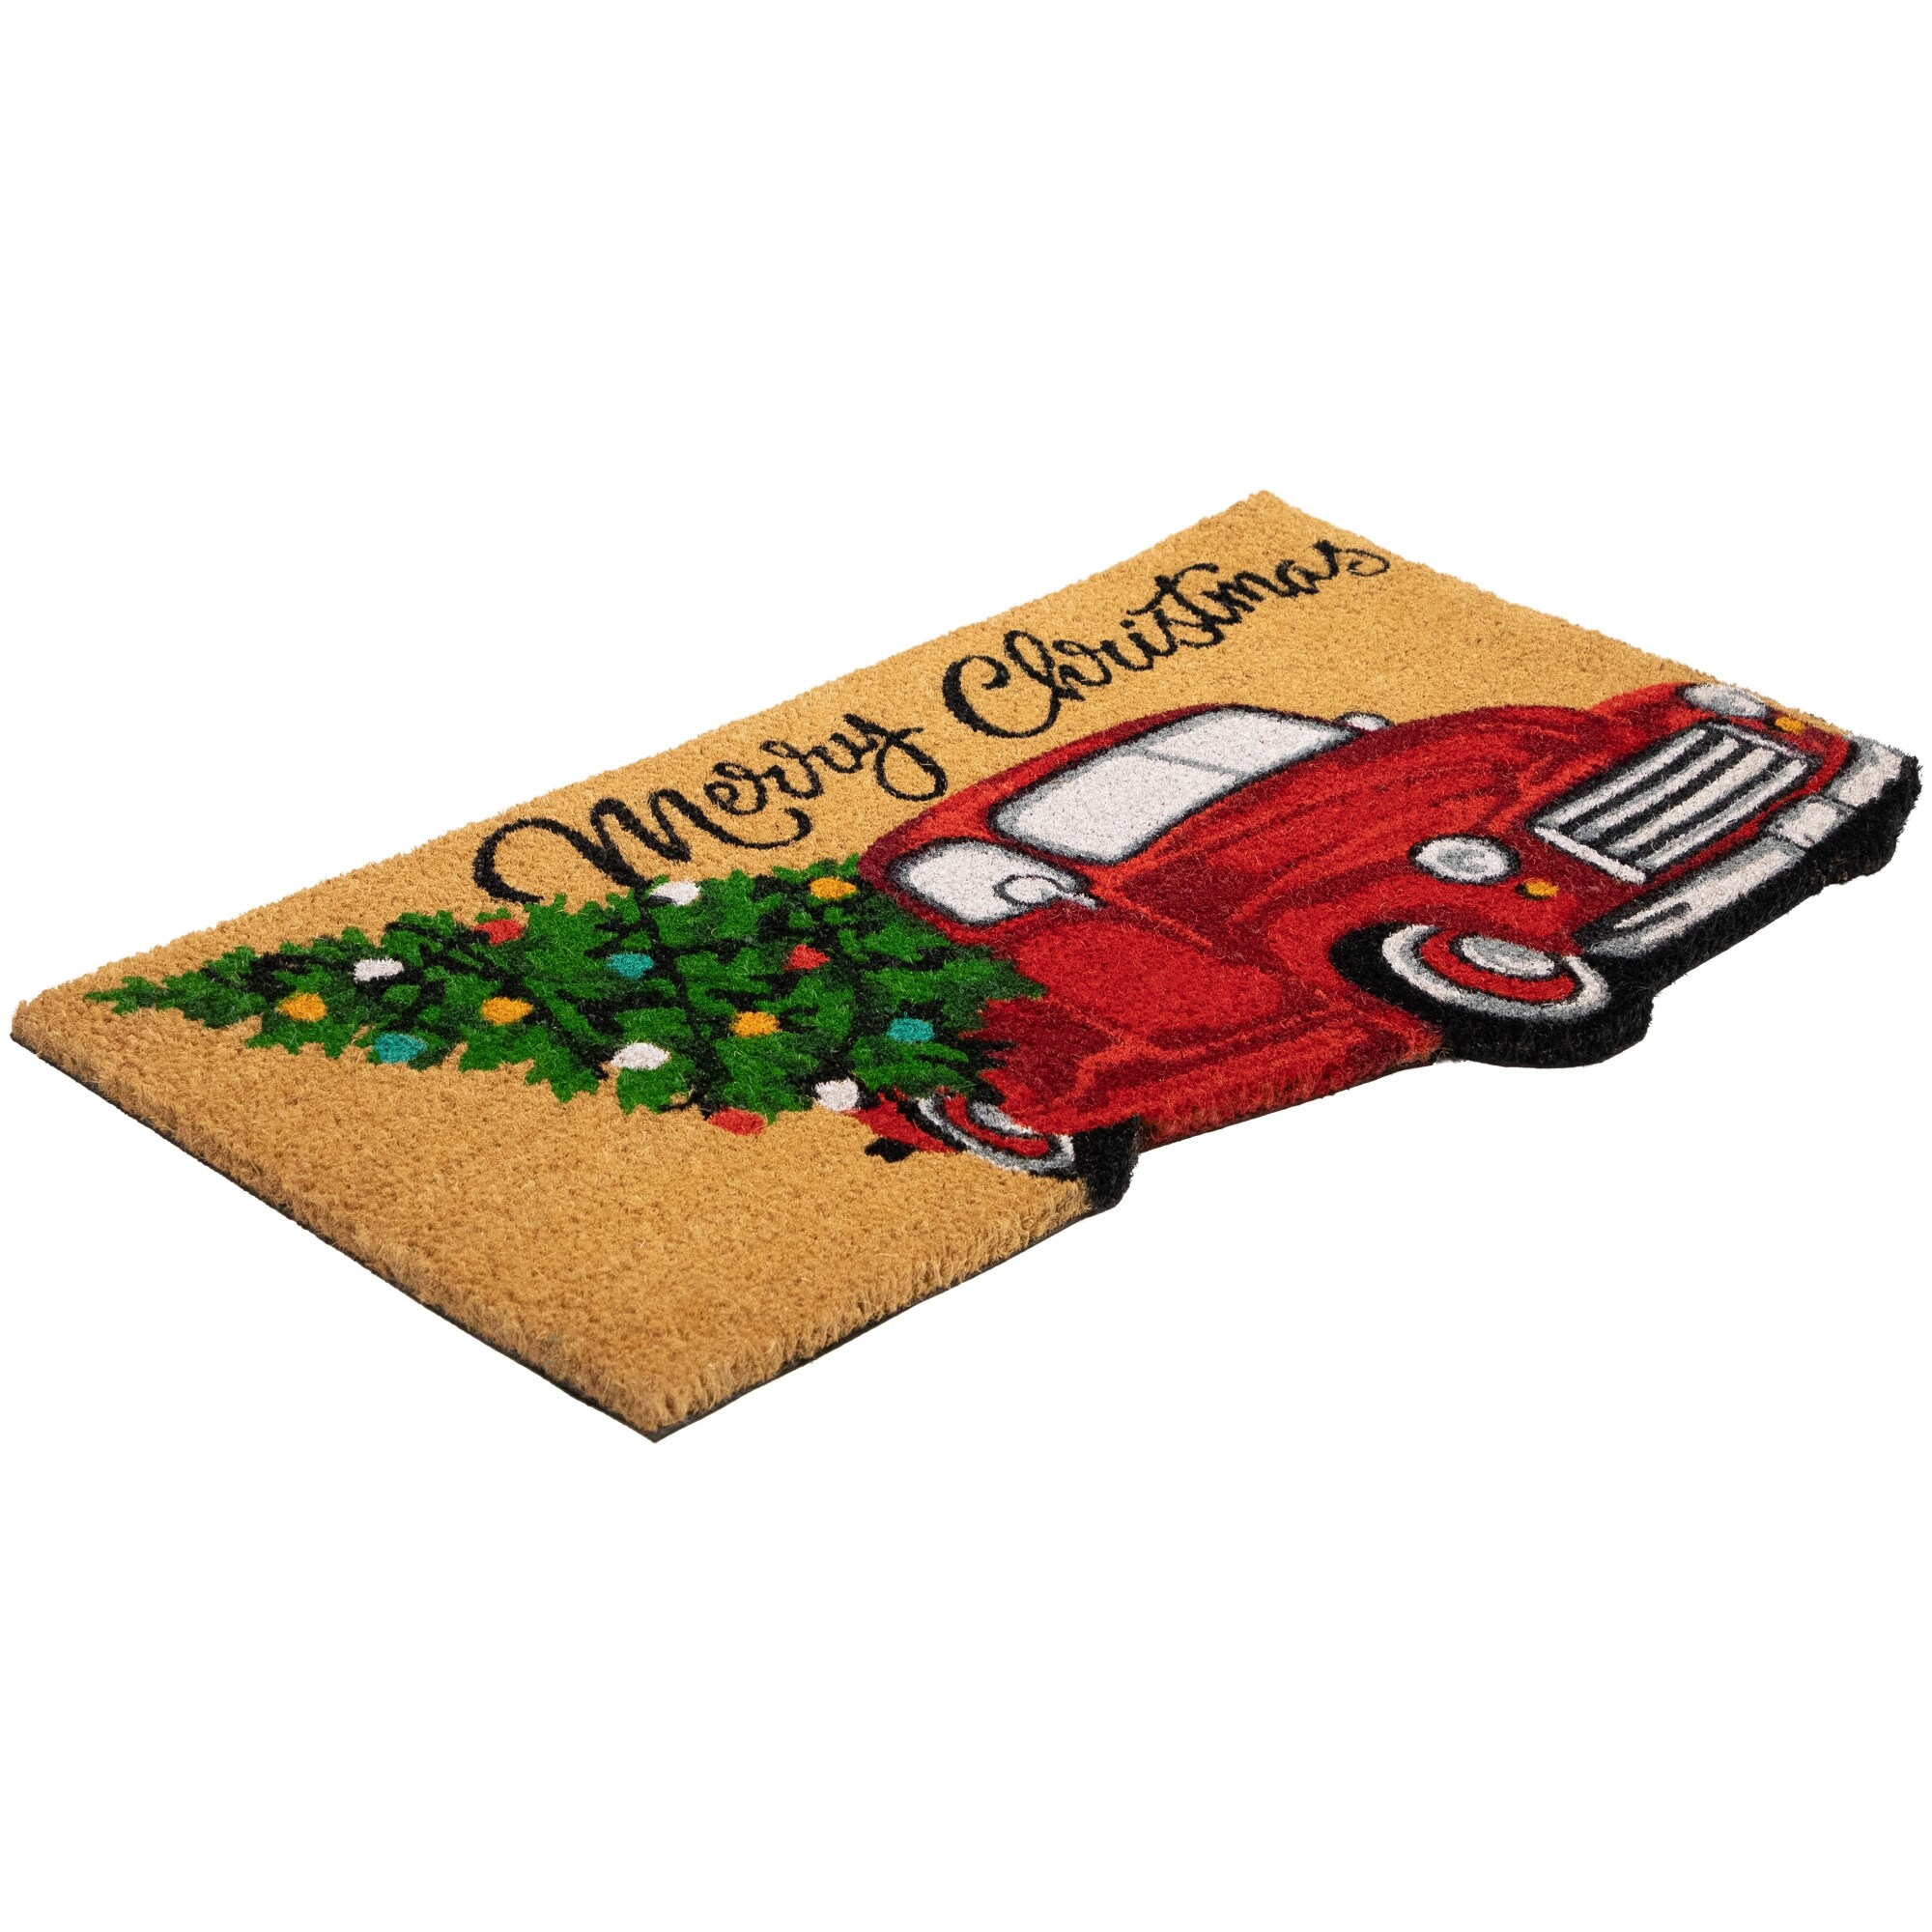 https://ak1.ostkcdn.com/images/products/is/images/direct/f34434c0b3dd0d0bb55a3f0c10b8fc37684bdbf0/Red-and-Green-Vintage-Truck-%22Merry-Christmas%22-Outdoor-Natural-Coir-Doormat-18%22-x-30%22.jpg